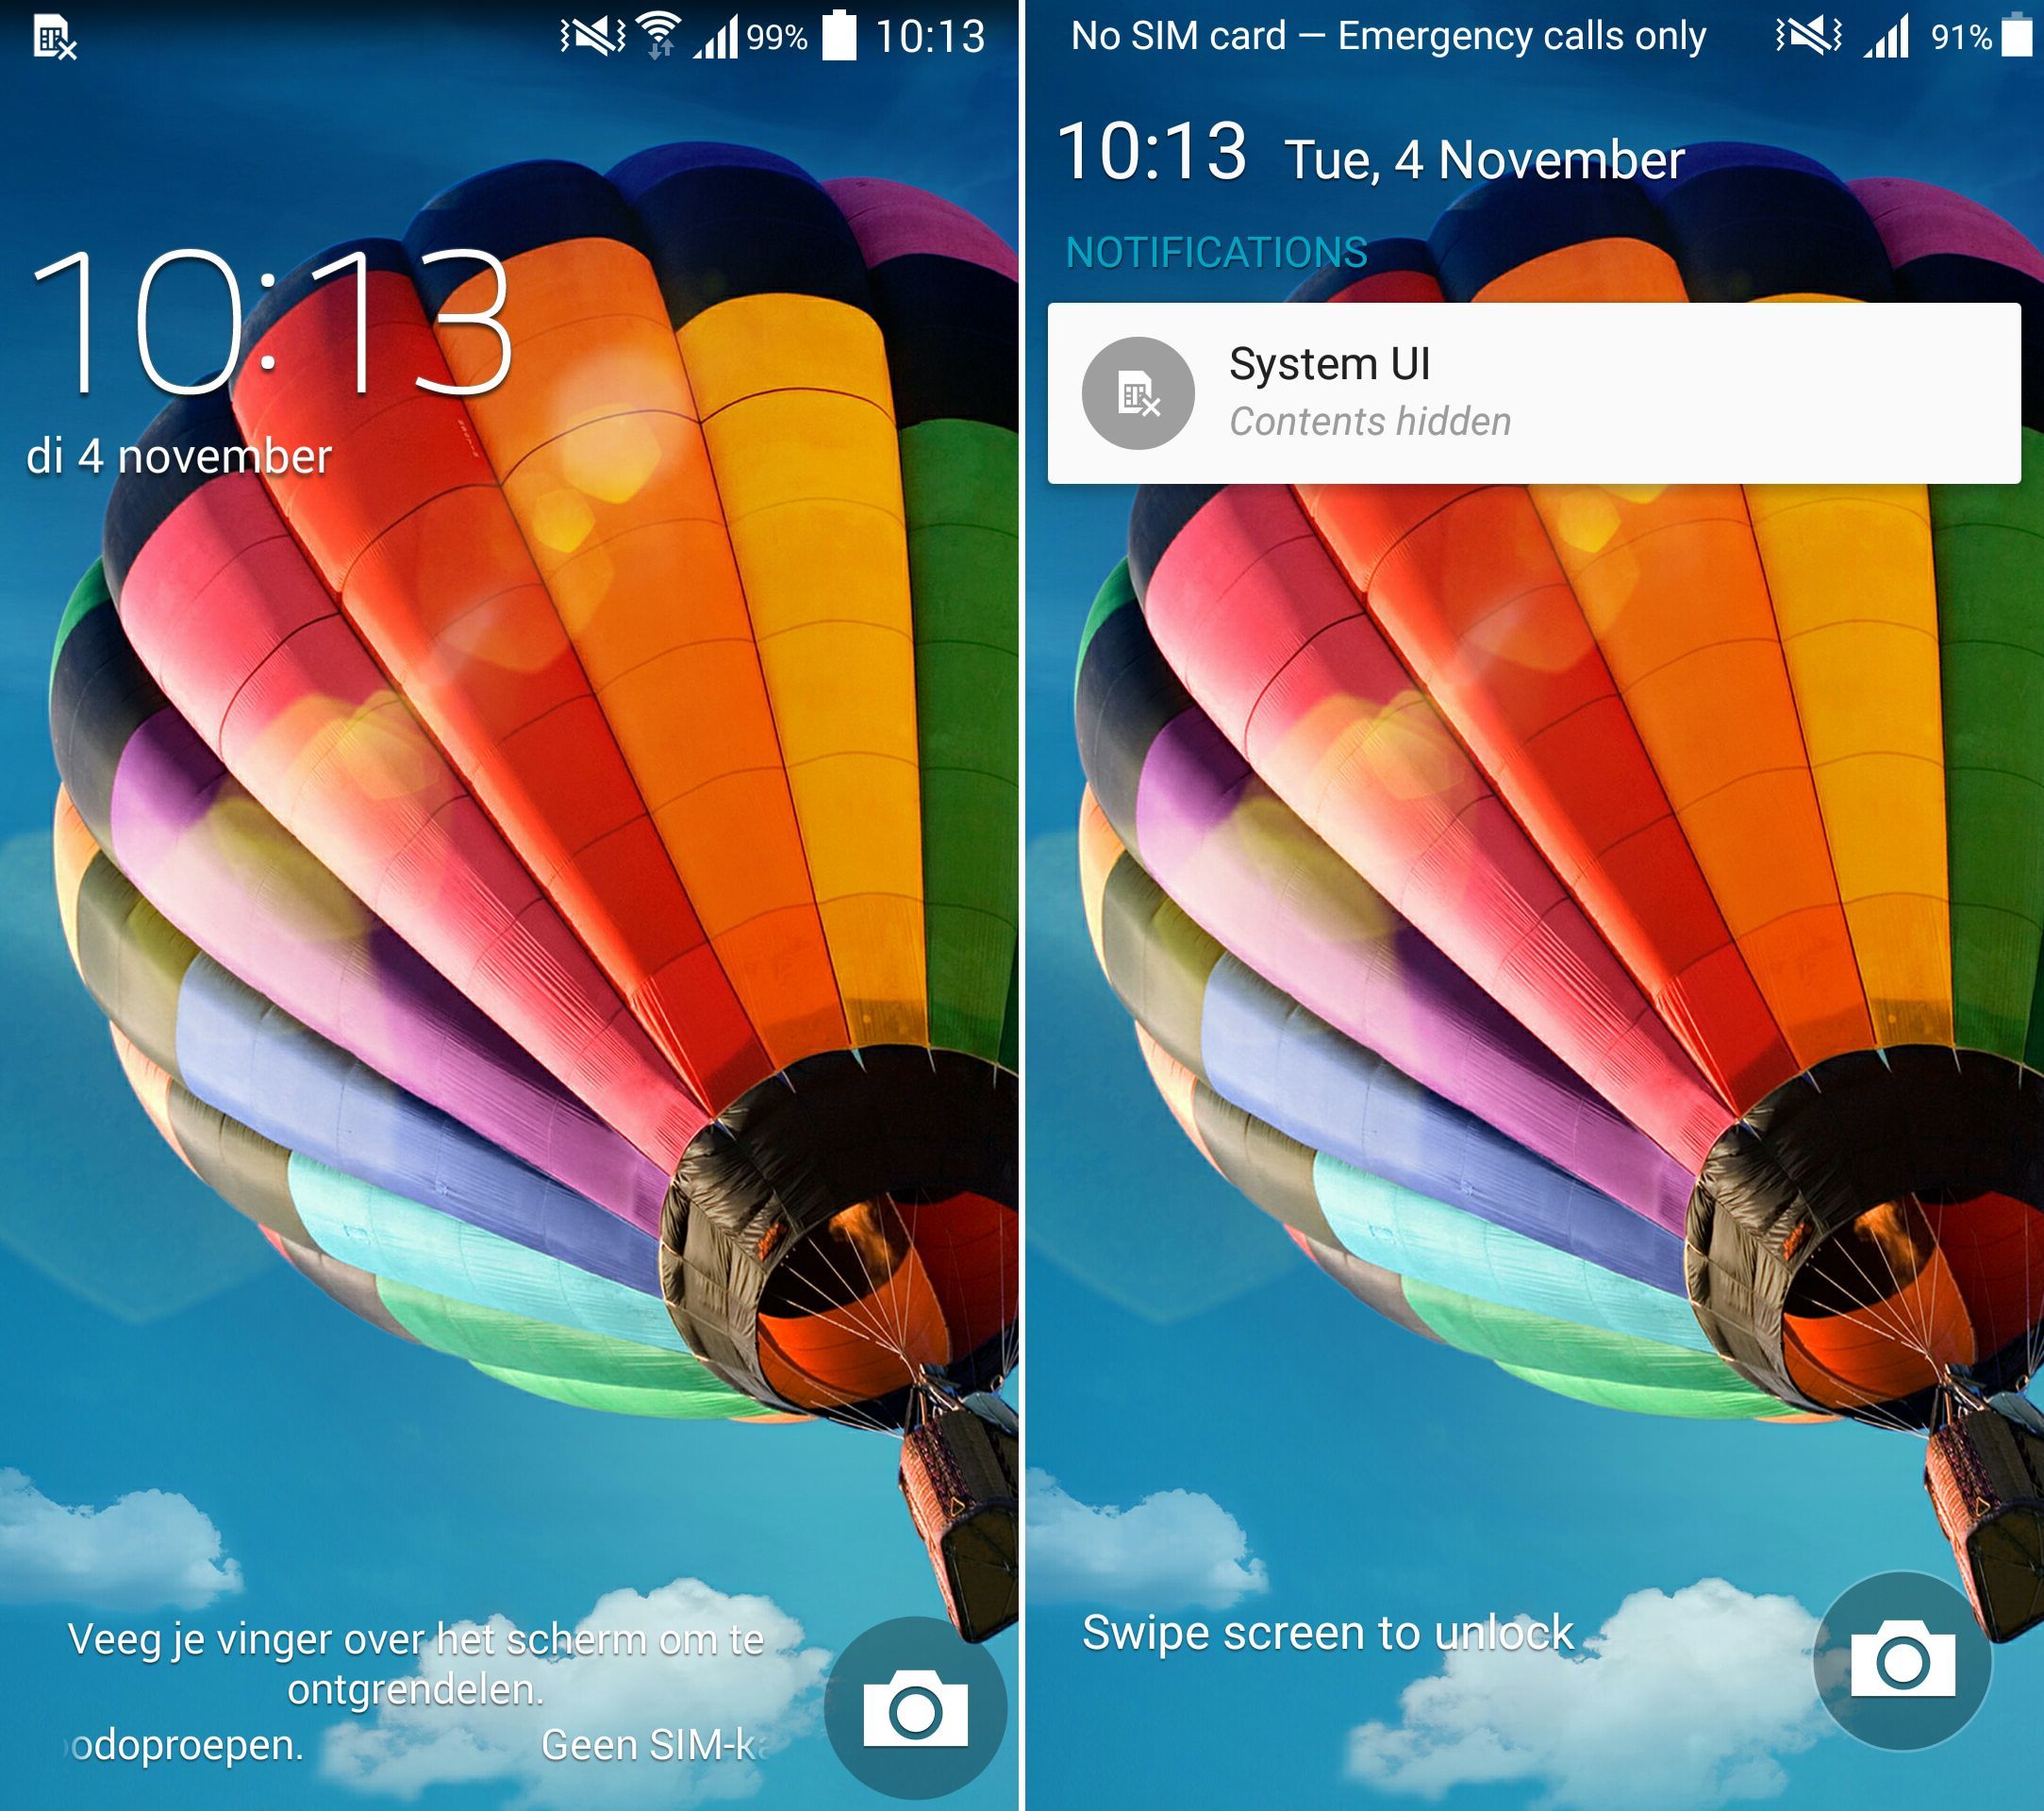 Apps We Can See A Revamped Messaging Application With The Lollipop